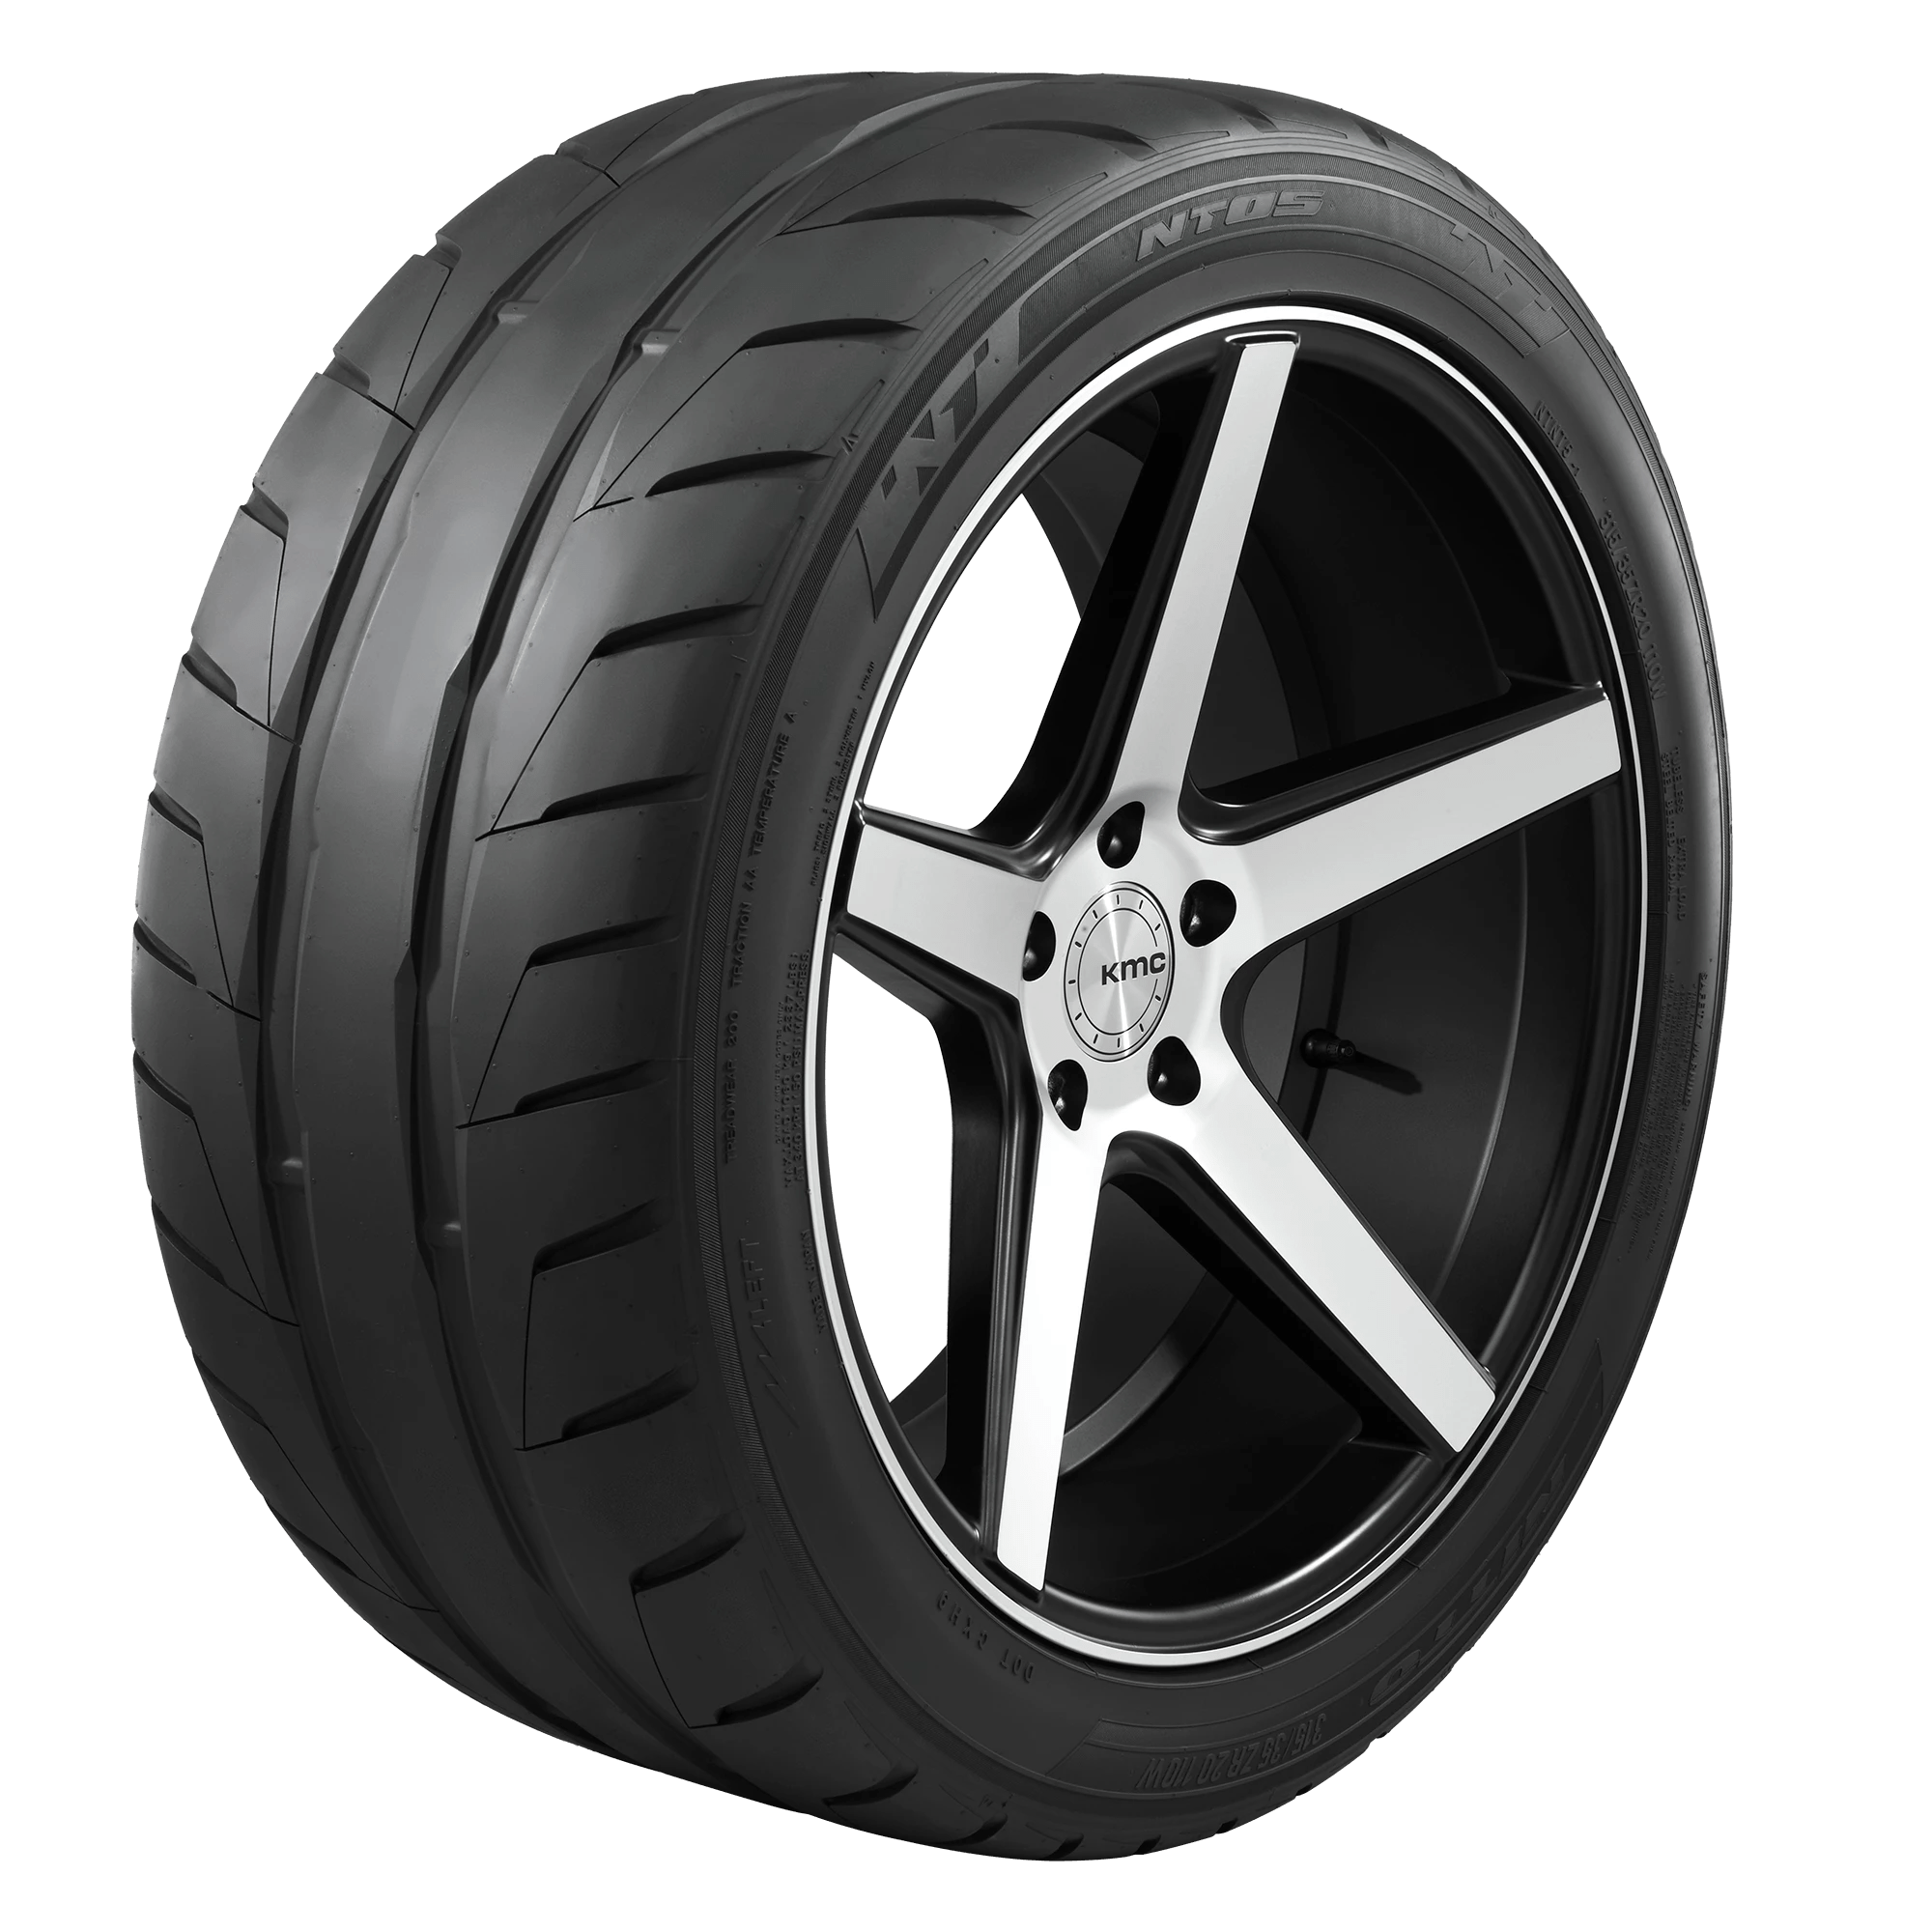 NITTO NT05 255/40ZR19 (27.1X10.2R 19) Tires